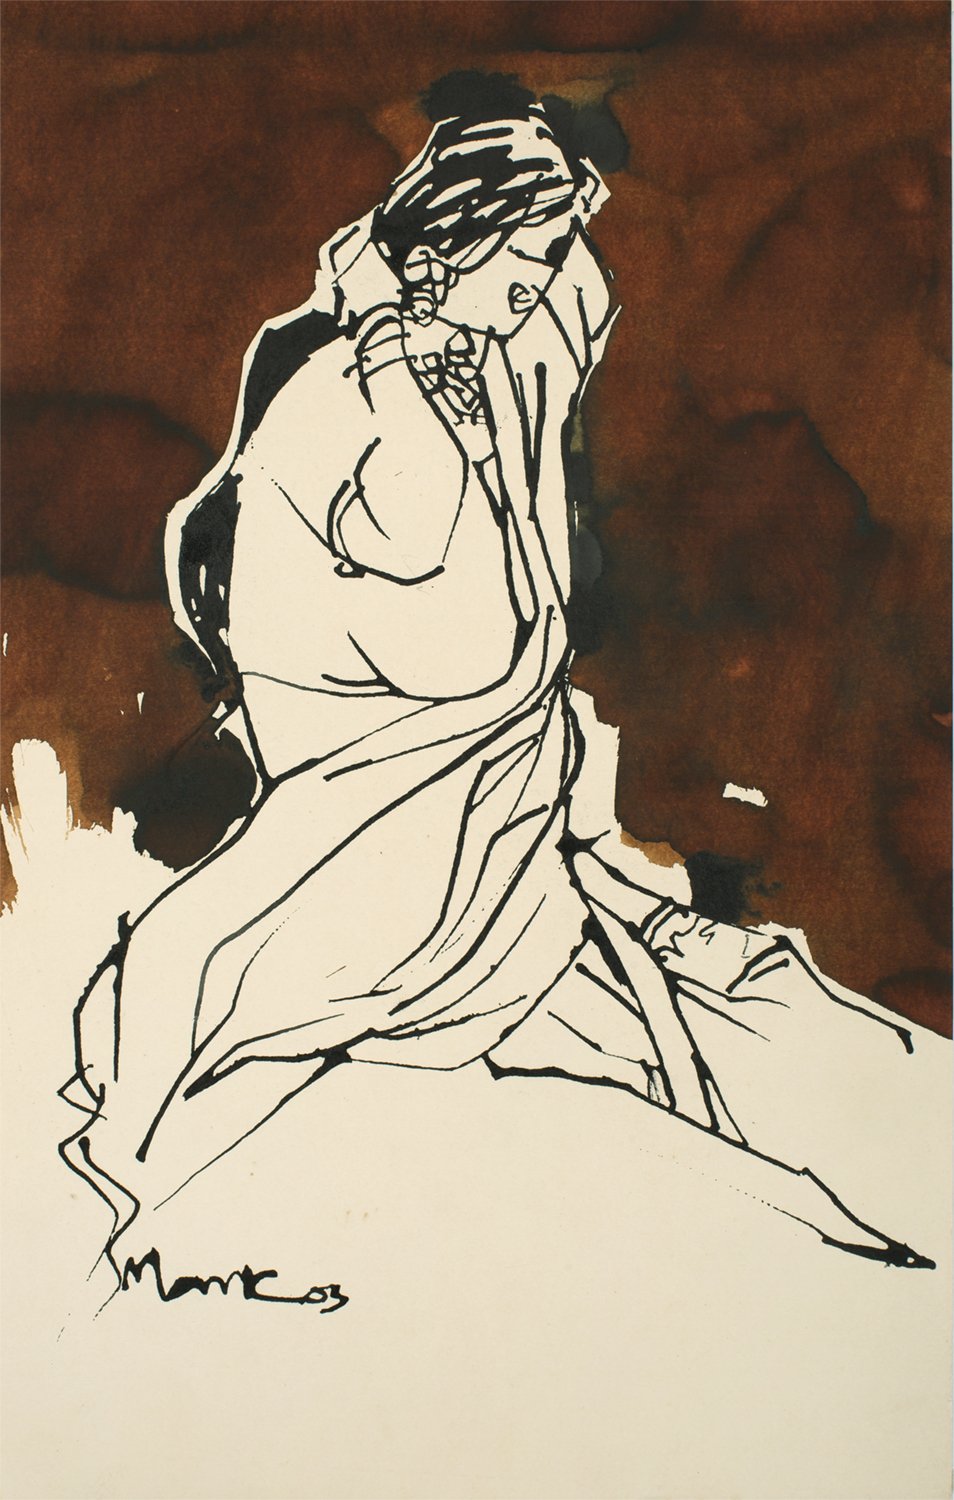 Performer 333|S. Mark Rathinaraj- Pen and Ink on Paper, , 21 x 13.5 inches